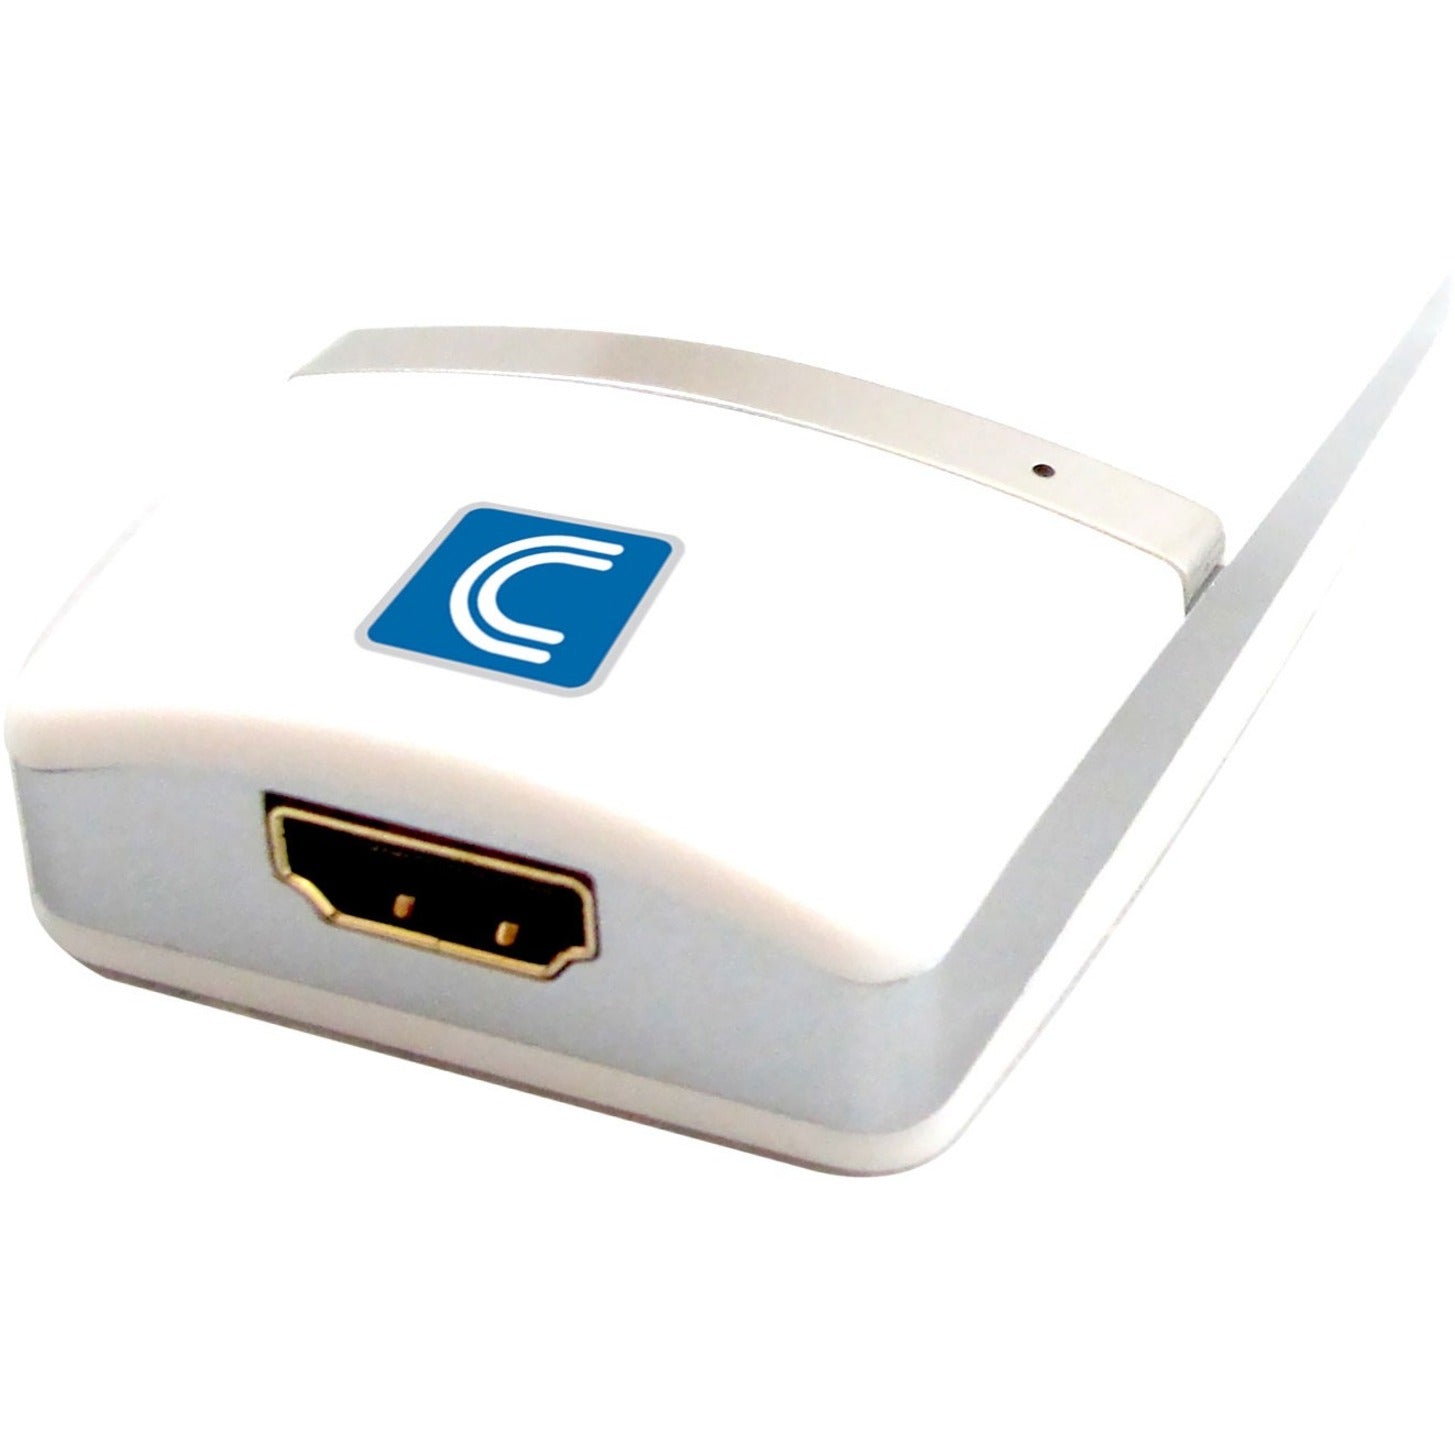 Comprehensive USB3-HDGA USB 3.0 to HDMI with Audio Converter, Supports 2048 x 1152 Resolution